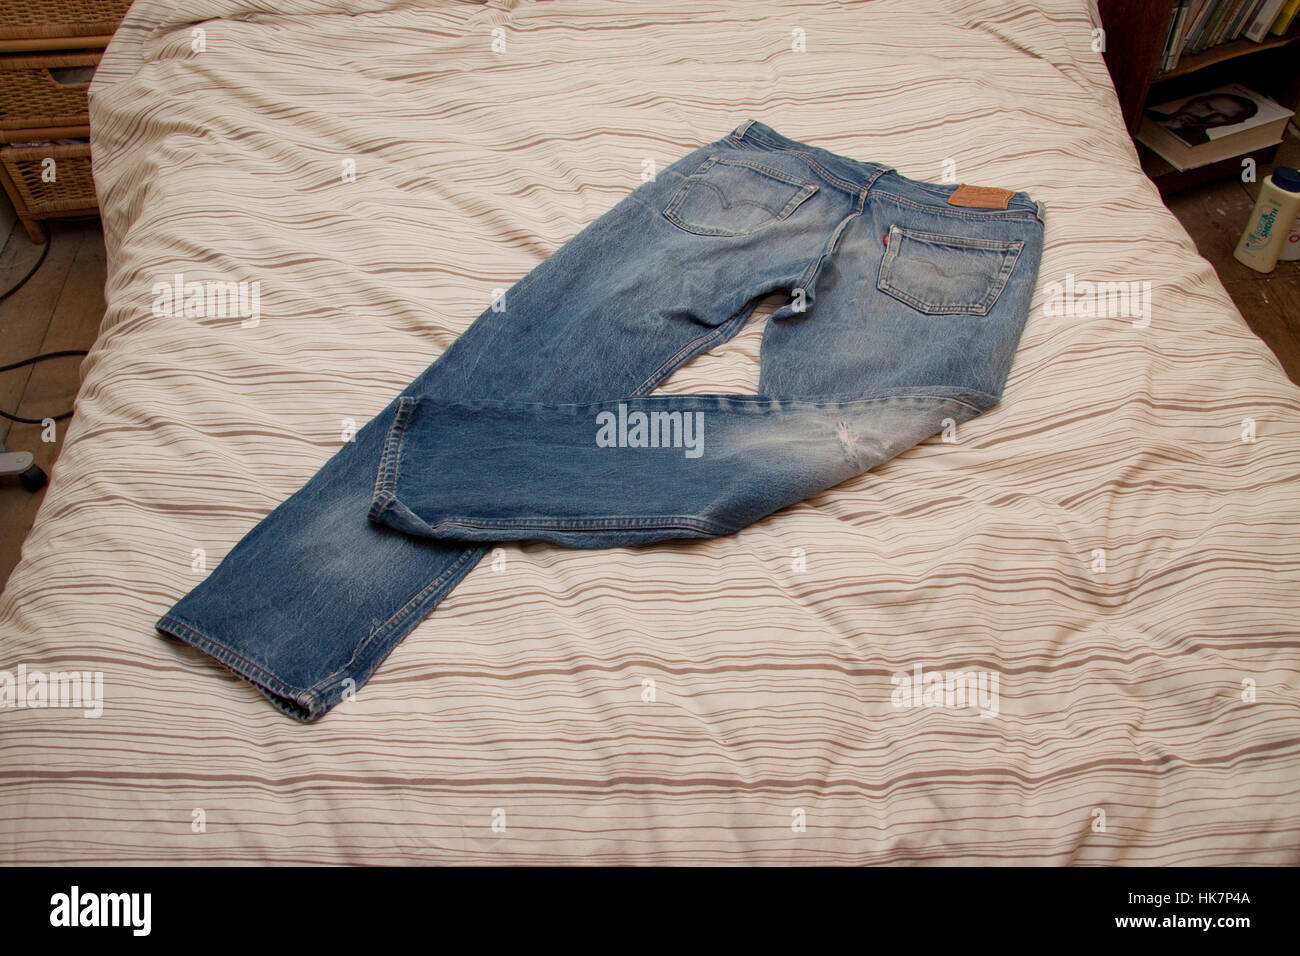 Worn blue jeans on a bed quilt Stock Photo